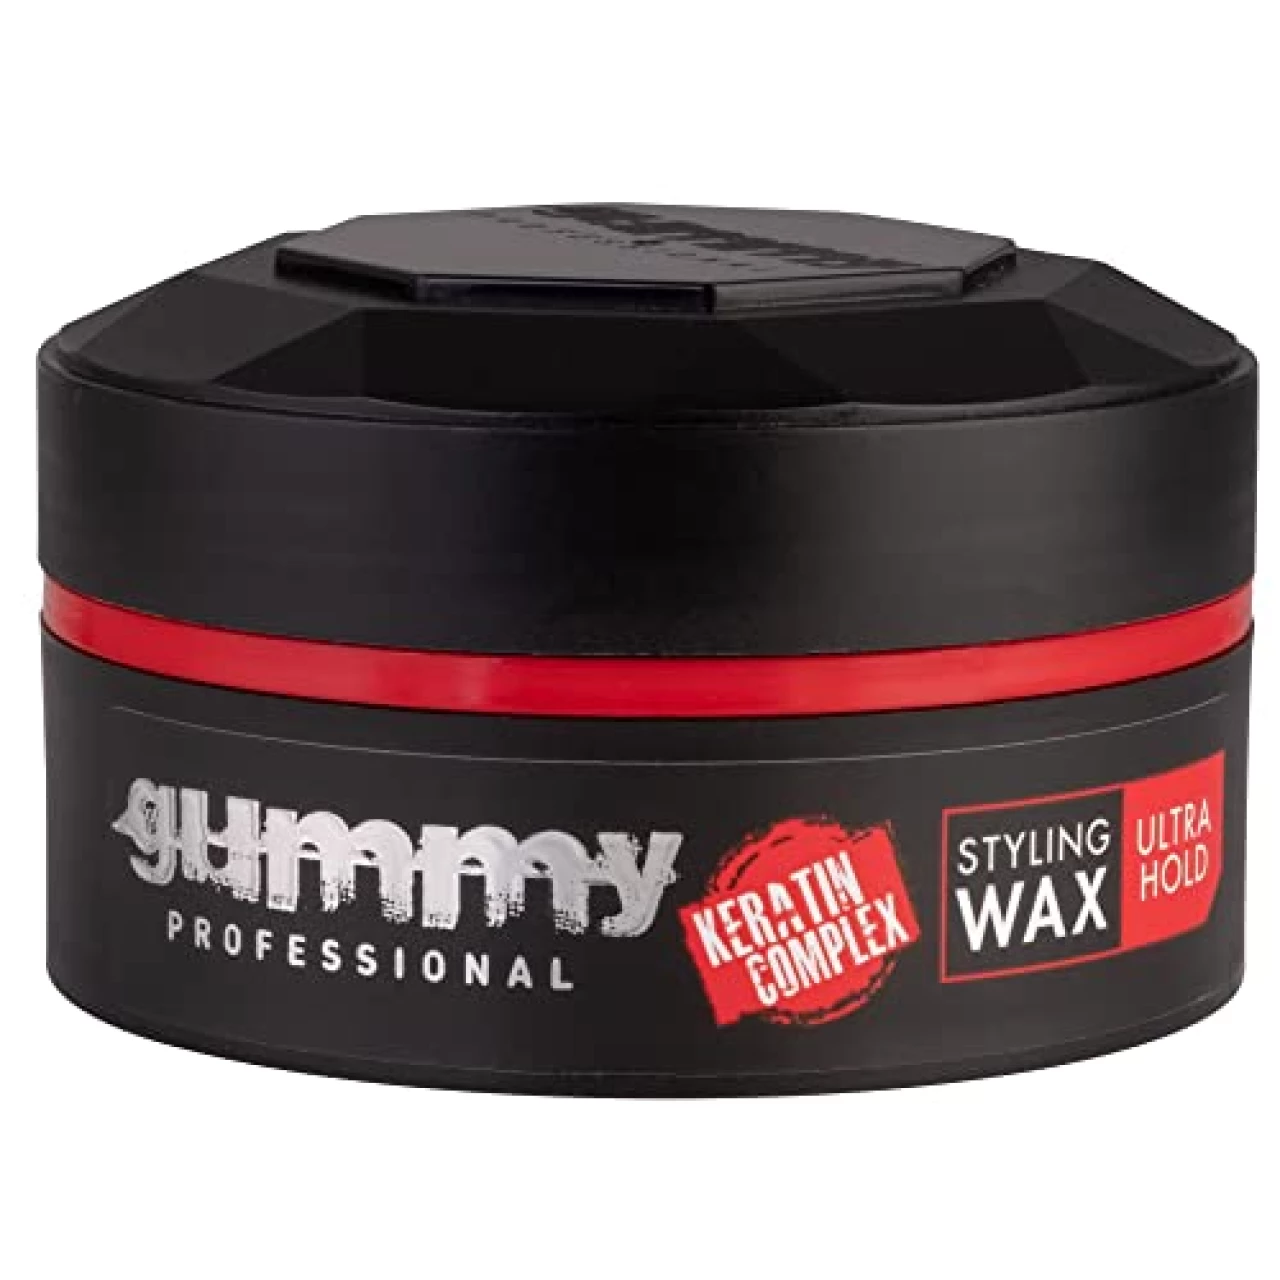 Gummy Hair Styling Wax, 5 Fl Oz ( Package may vary)